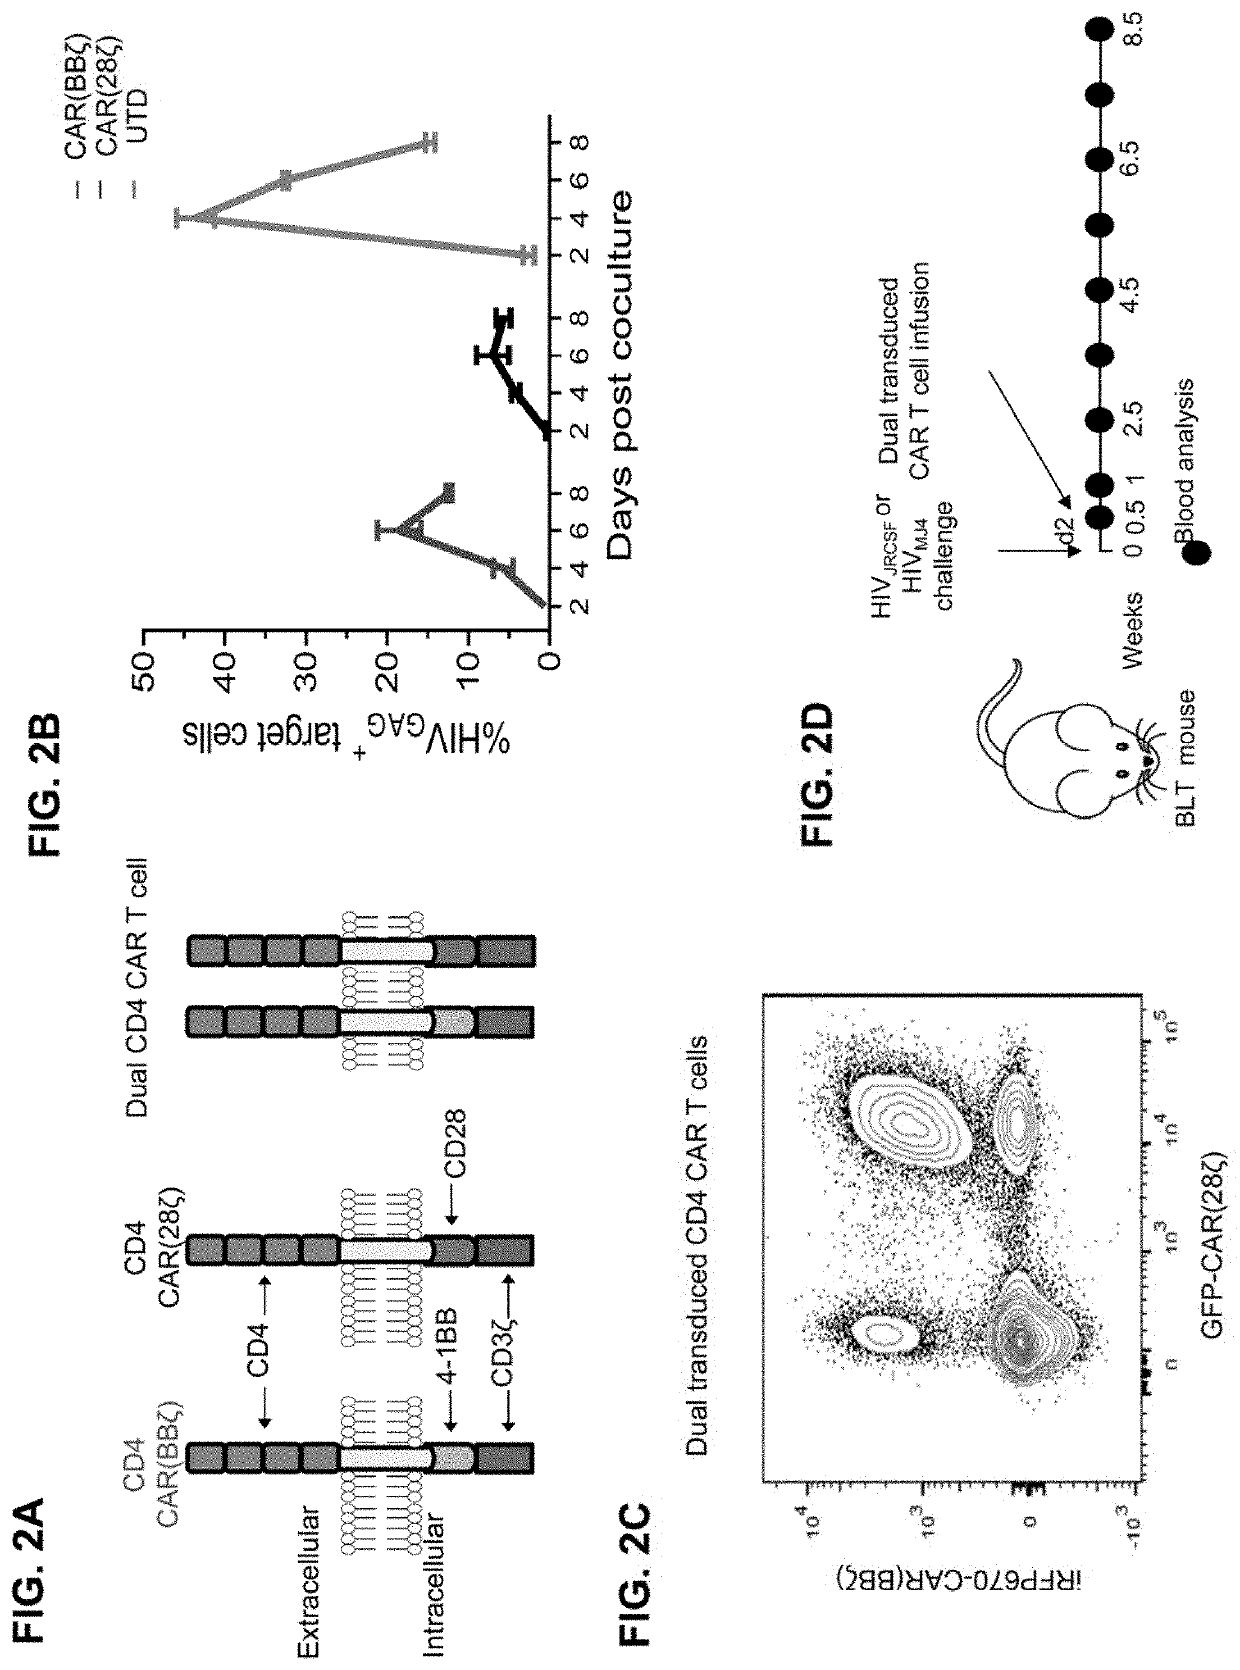 Dual car expressing t cells individually linked to cd28 and 4-1bb